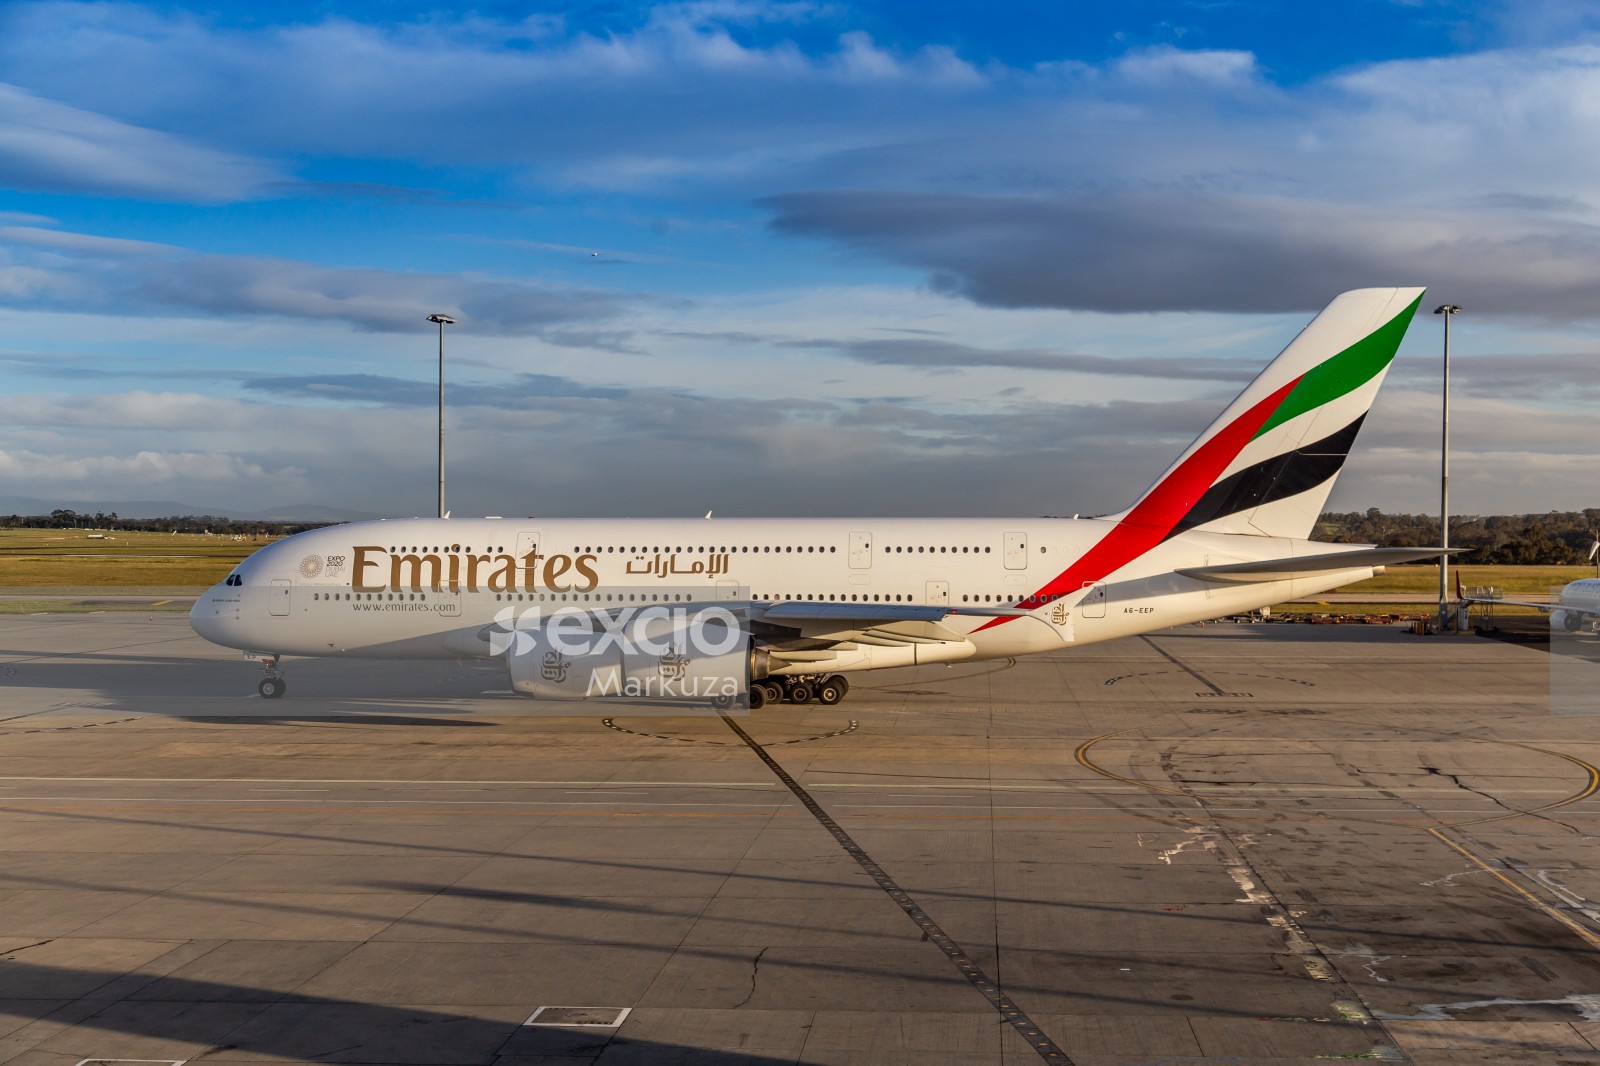 Emirates commercial airplane